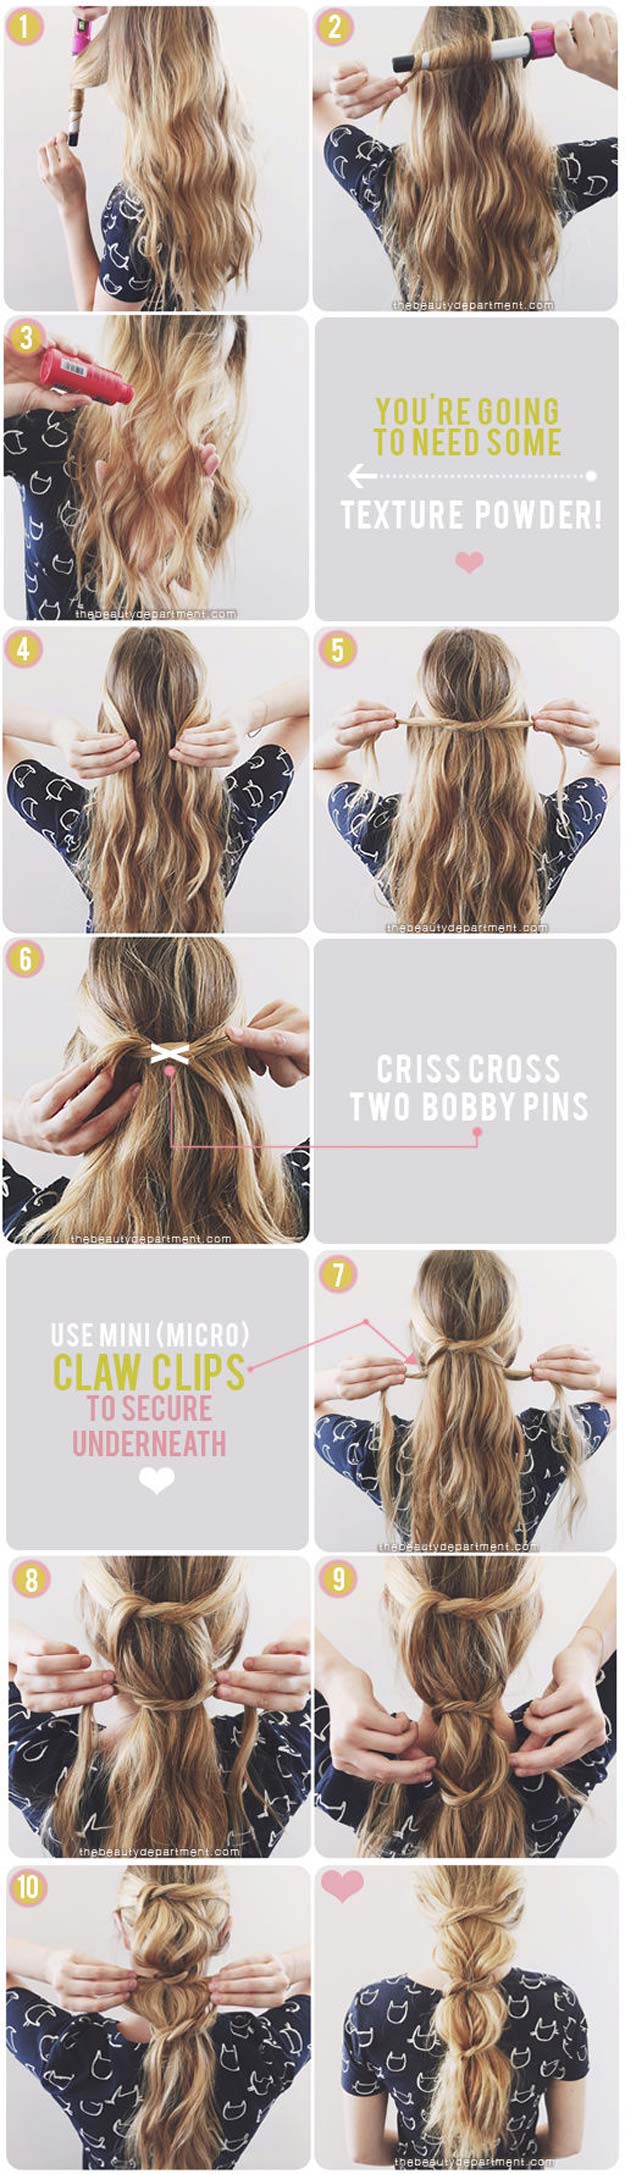 Best Hairstyles for Long Hair - Messy Knotted Ponytail - Step by Step Tutorials for Easy Curls, Updo, Half Up, Braids and Lazy Girl Looks. Prom Ideas, Special Occasion Hair and Braiding Instructions for Teens, Teenagers and Adults, Women and Girls 